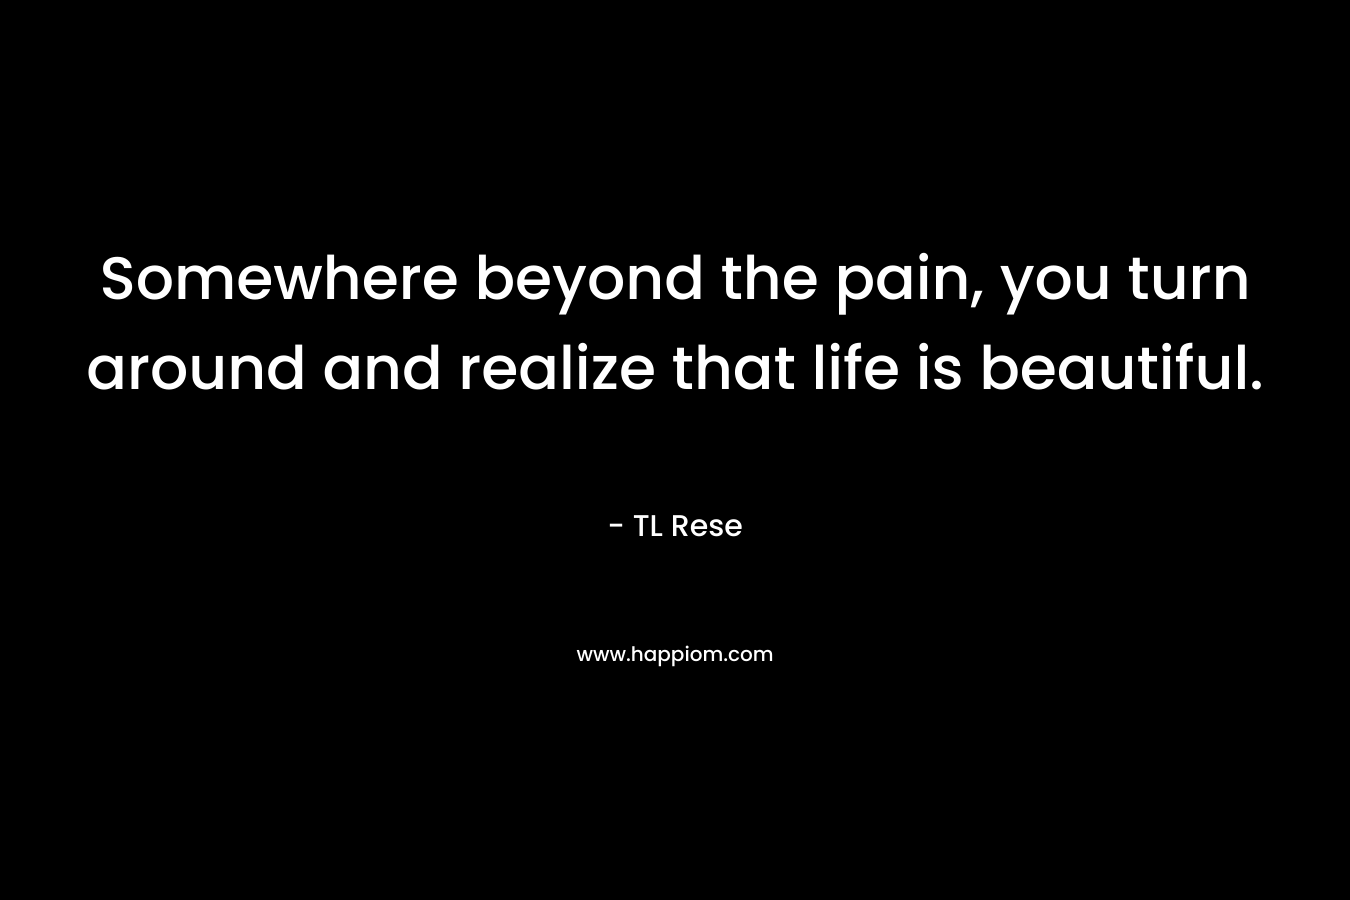 Somewhere beyond the pain, you turn around and realize that life is beautiful. – TL Rese